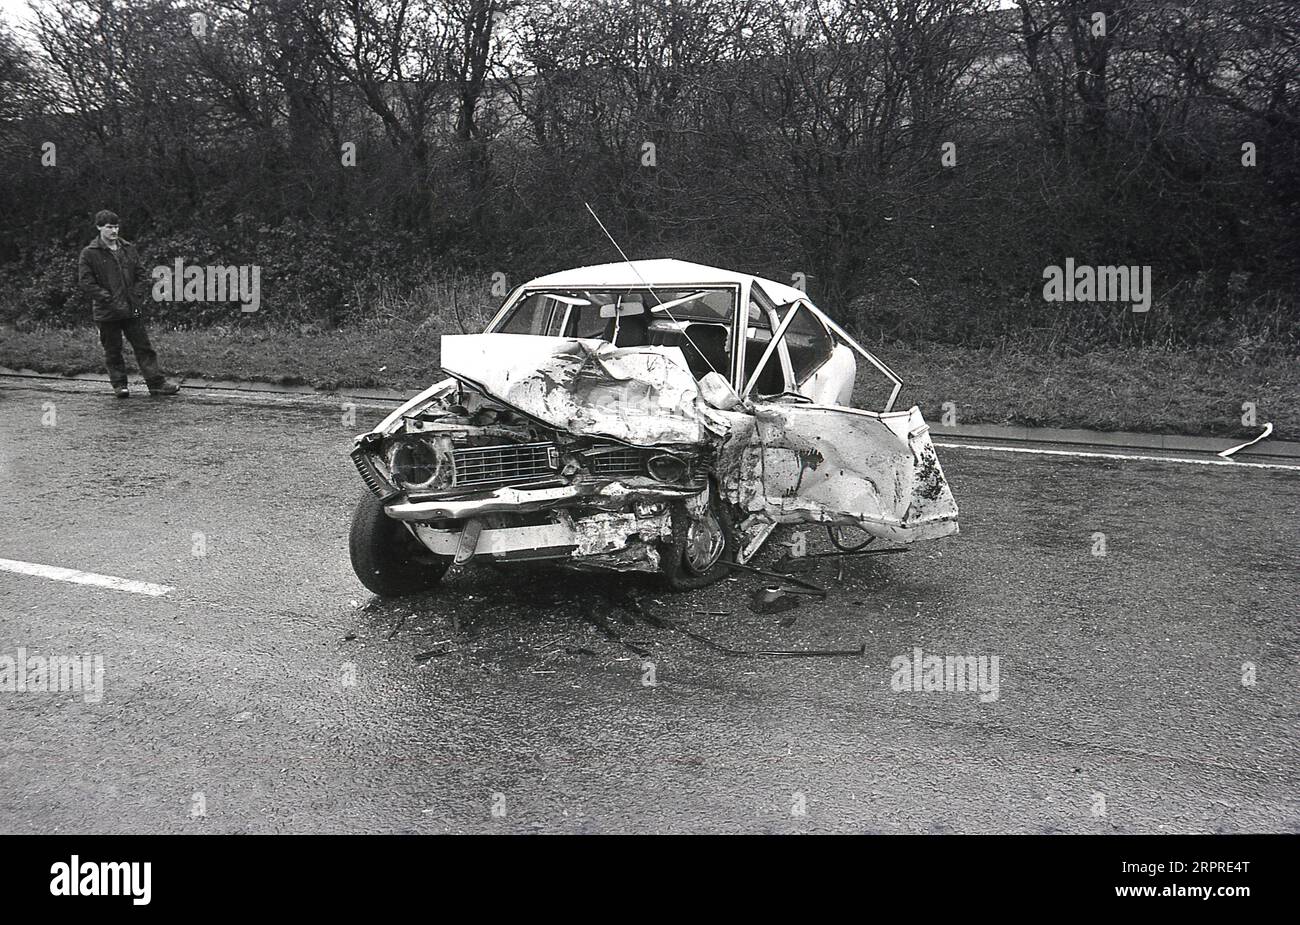 1983, historical, a man standing on the edge of a main road looking at his badly crashed car, having been involved in a head on collision on a wet, slippery moorland road, England, UK. Stock Photo